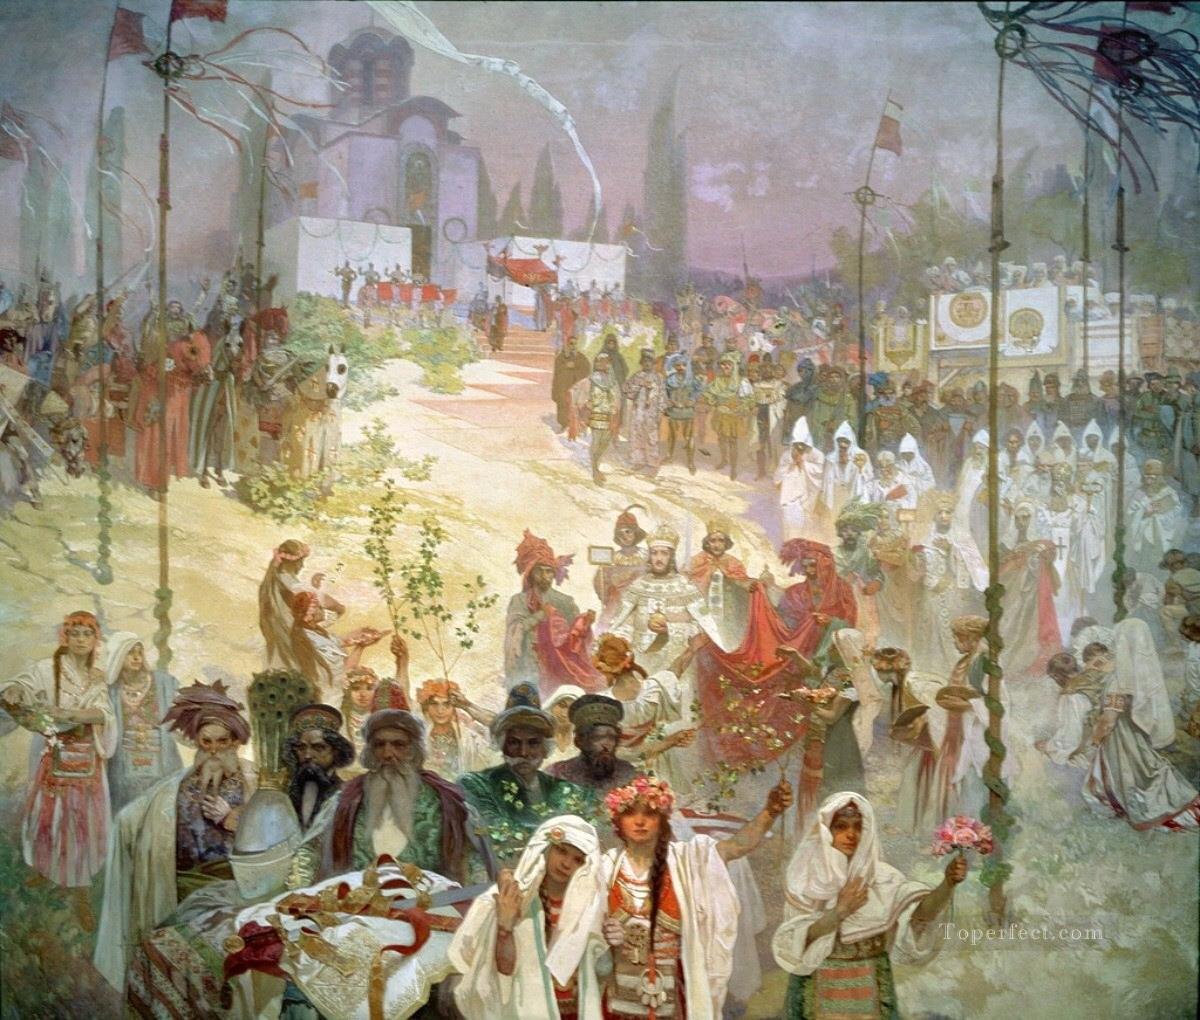 Coronation of Emperor Duaan in The Slavonic Epic Alphonse Mucha Oil Paintings